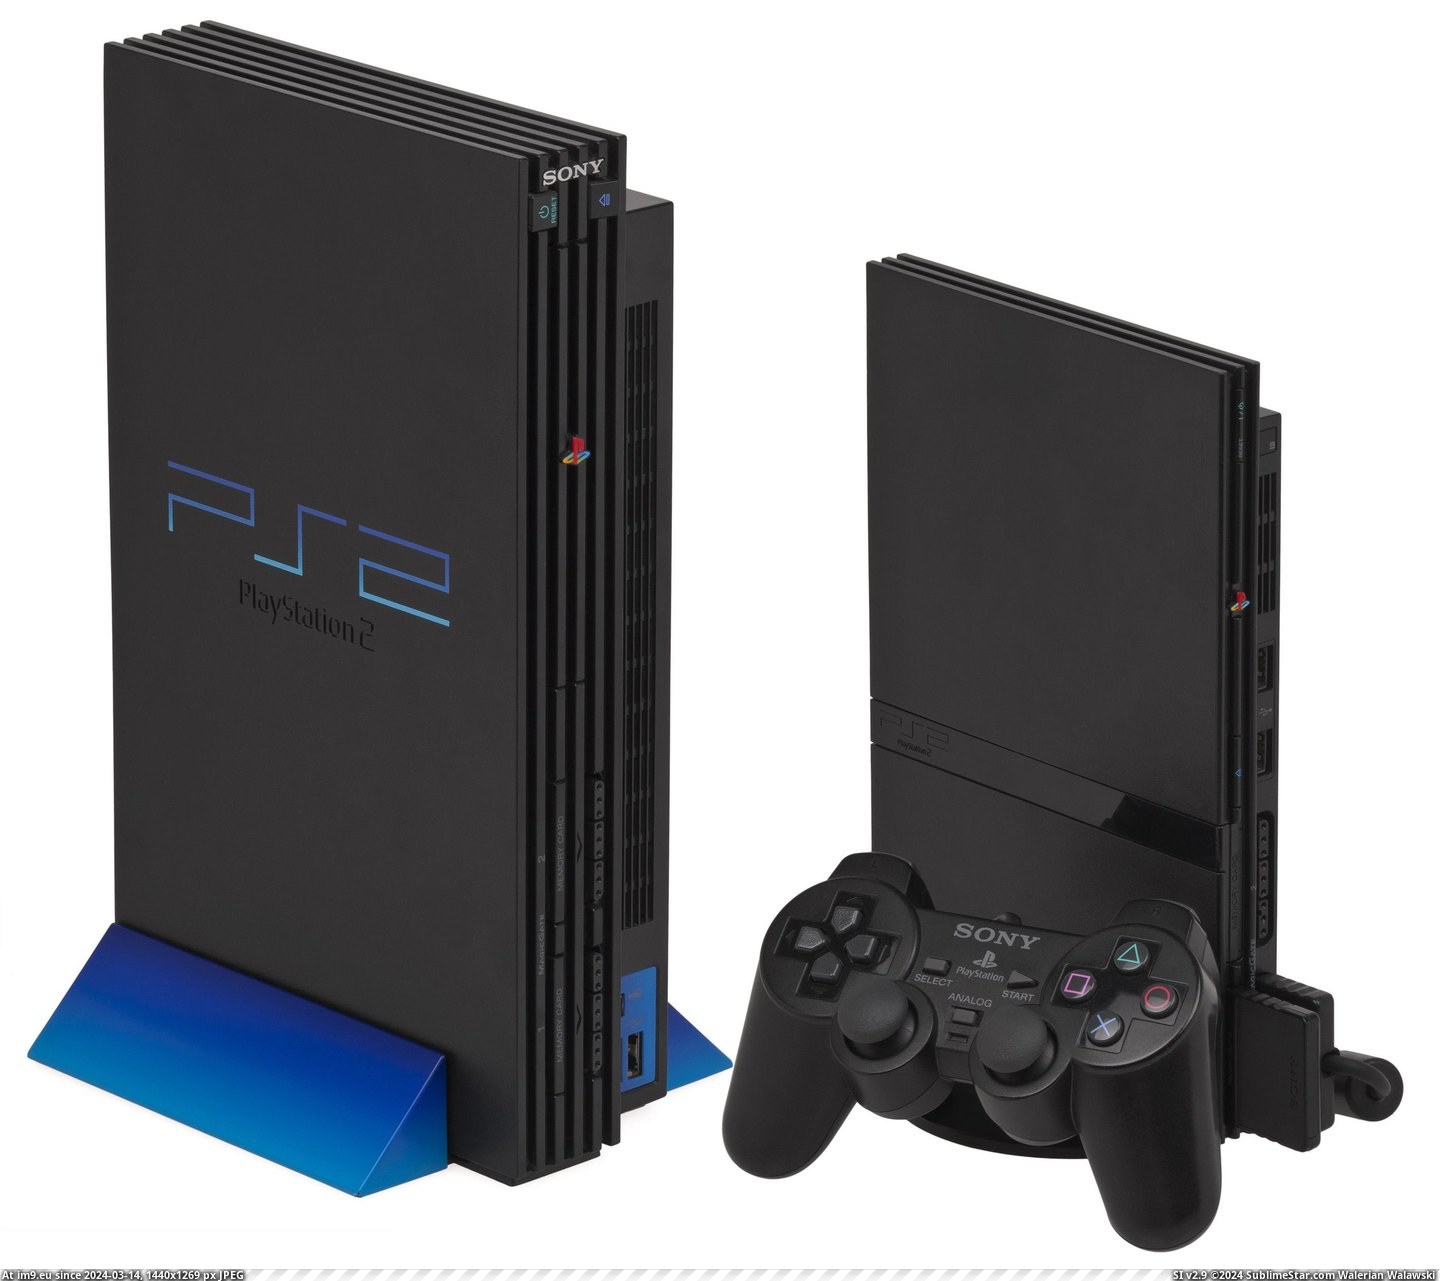 #Gaming #Time #Happy #March #Selling #Mill #14th #Birthday #Playstation #Console [Gaming] Happy 14th Birthday to the PlayStation 2 (March 4, 2000) The best-selling gaming console of all time with over 155 mill Pic. (Изображение из альбом My r/GAMING favs))